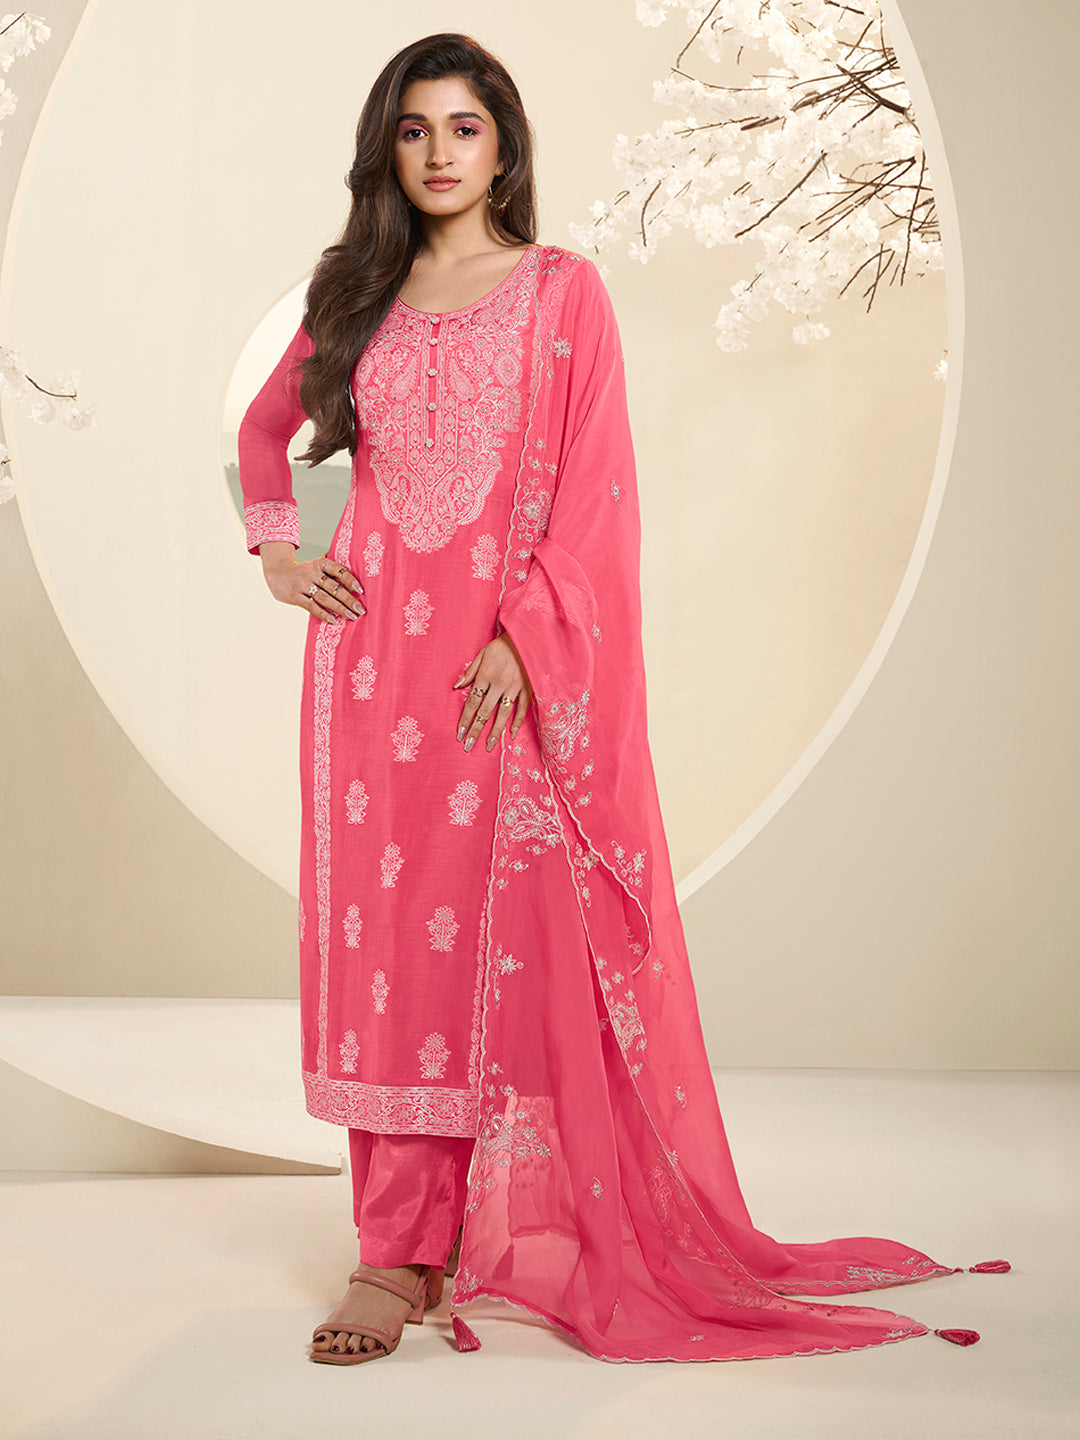 Pink Muslin Jacquard Kurta Suit Set with HandCrafted Buttons Product vendor